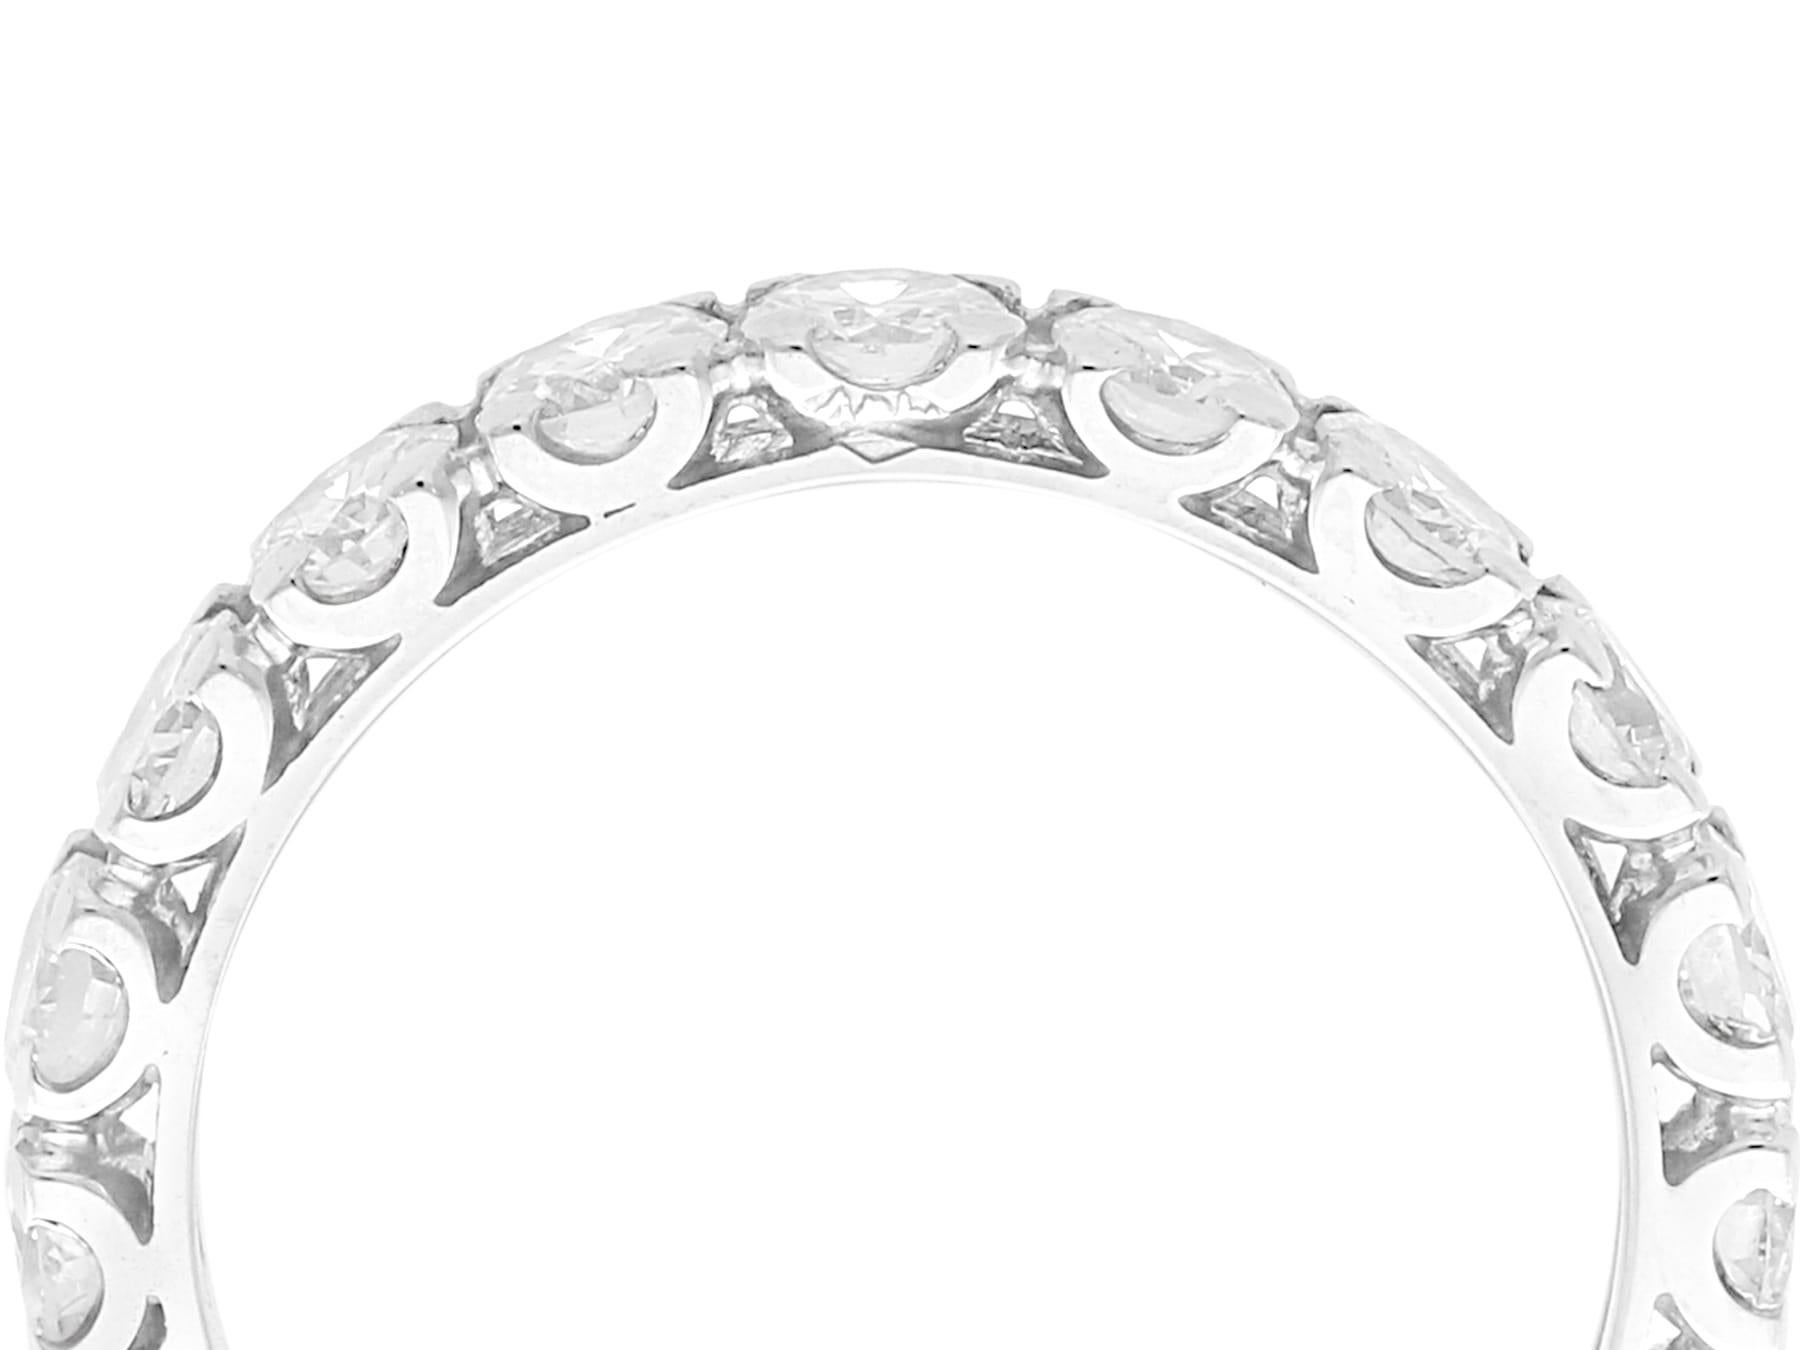 A fine and impressive vintage 1950s 1.90 carat diamond and 18 karat white gold full eternity ring; part of our diverse diamond jewelry and estate jewelry collections.

This fine and impressive vintage full eternity ring has been crafted in 18k white